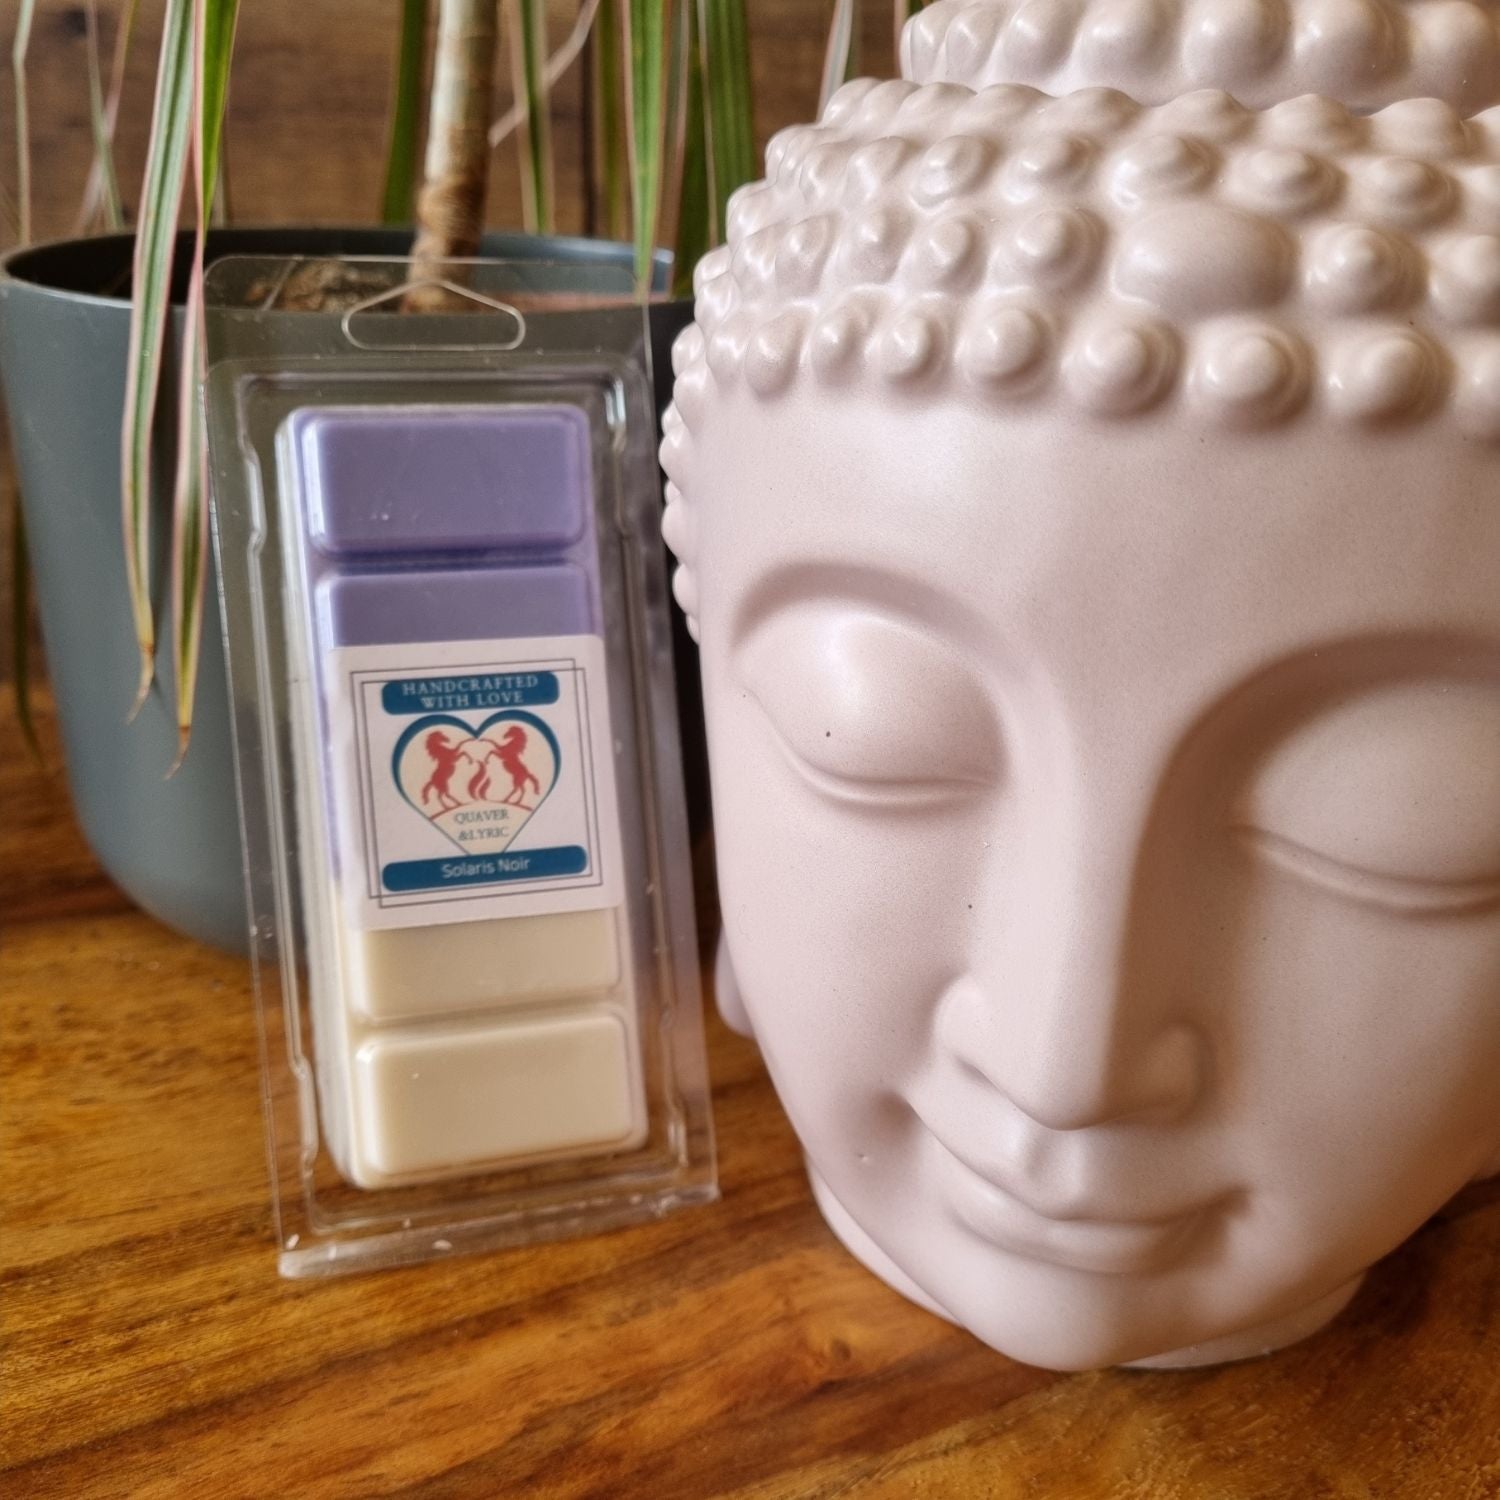  a velvet and white wax melt bar in a clamshell with quaver and lyric rearing horse branding next to a buddha's head wax warmer